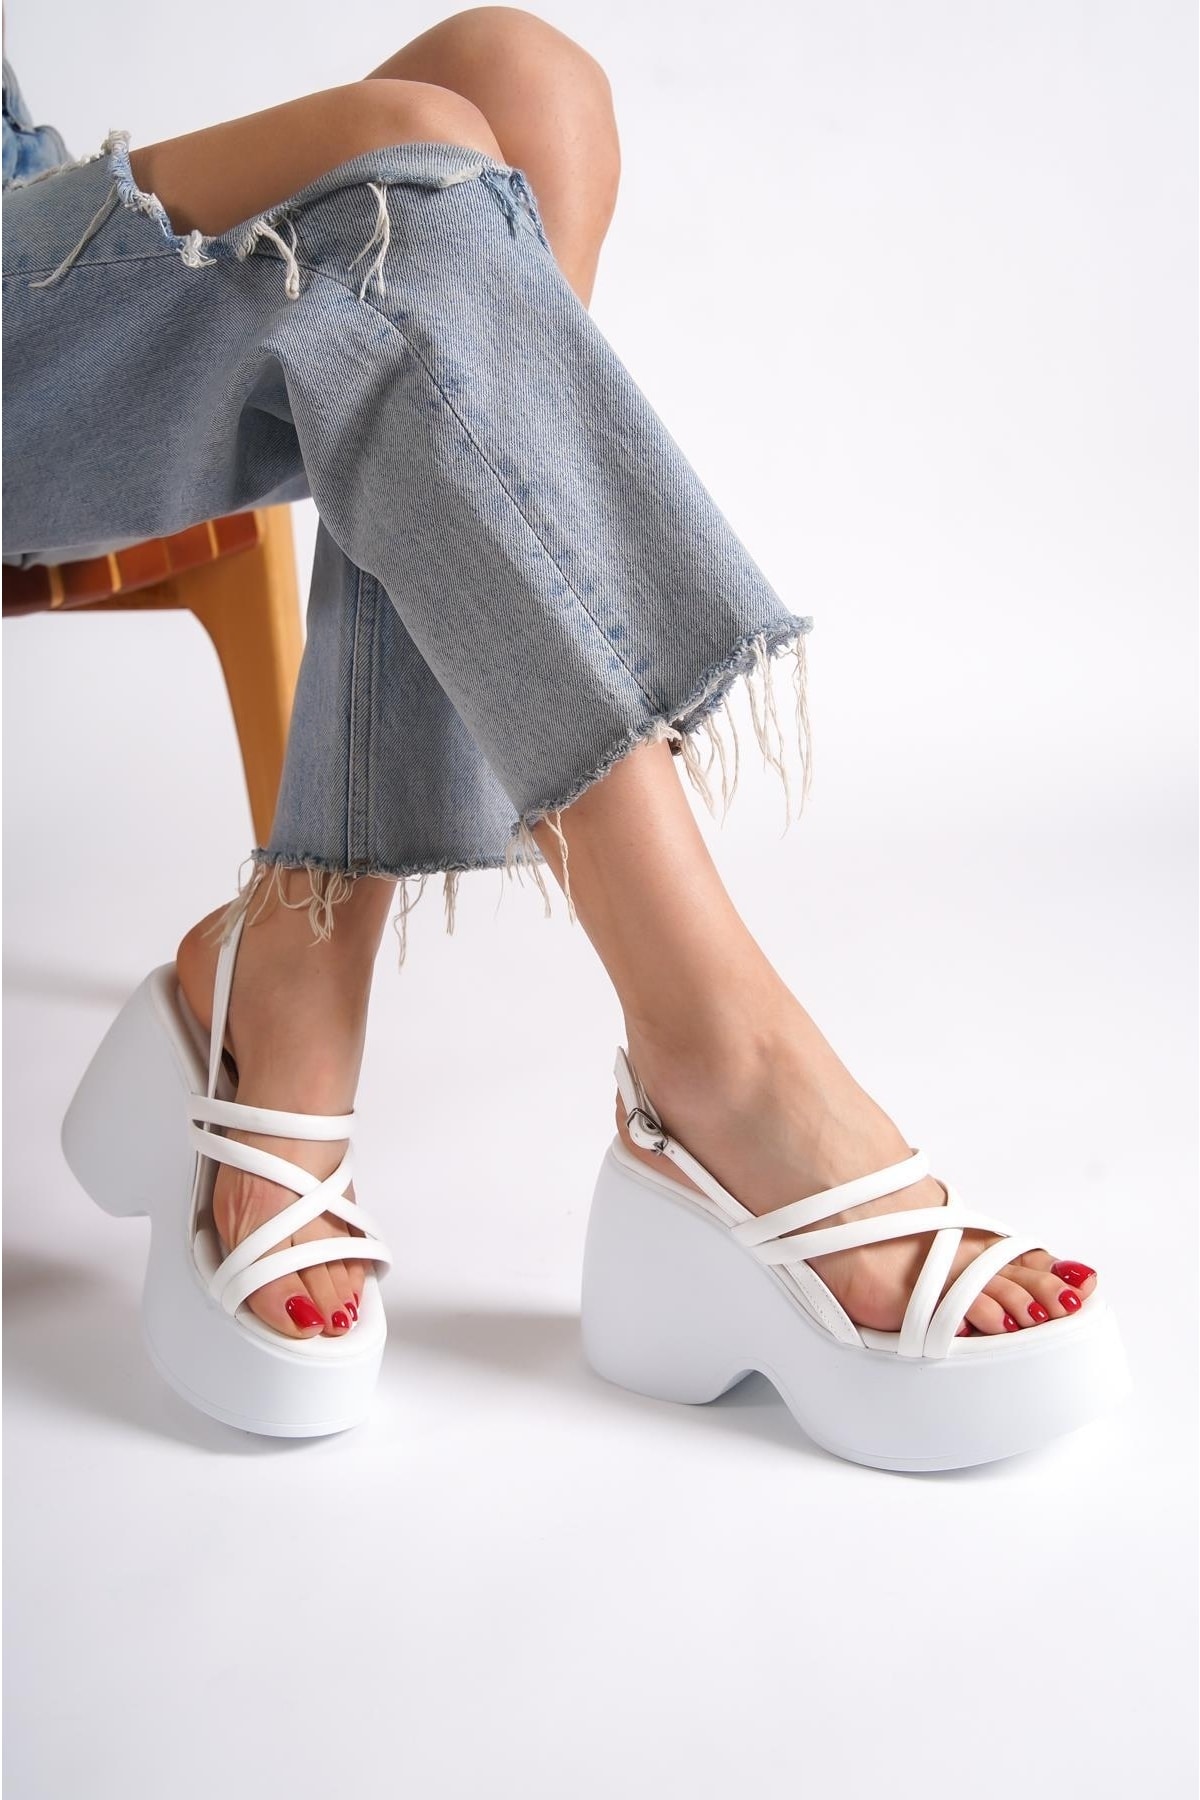 Capone Outfitters Capone Women's High Wedge Heel Ankle Strap White Women's Sandals